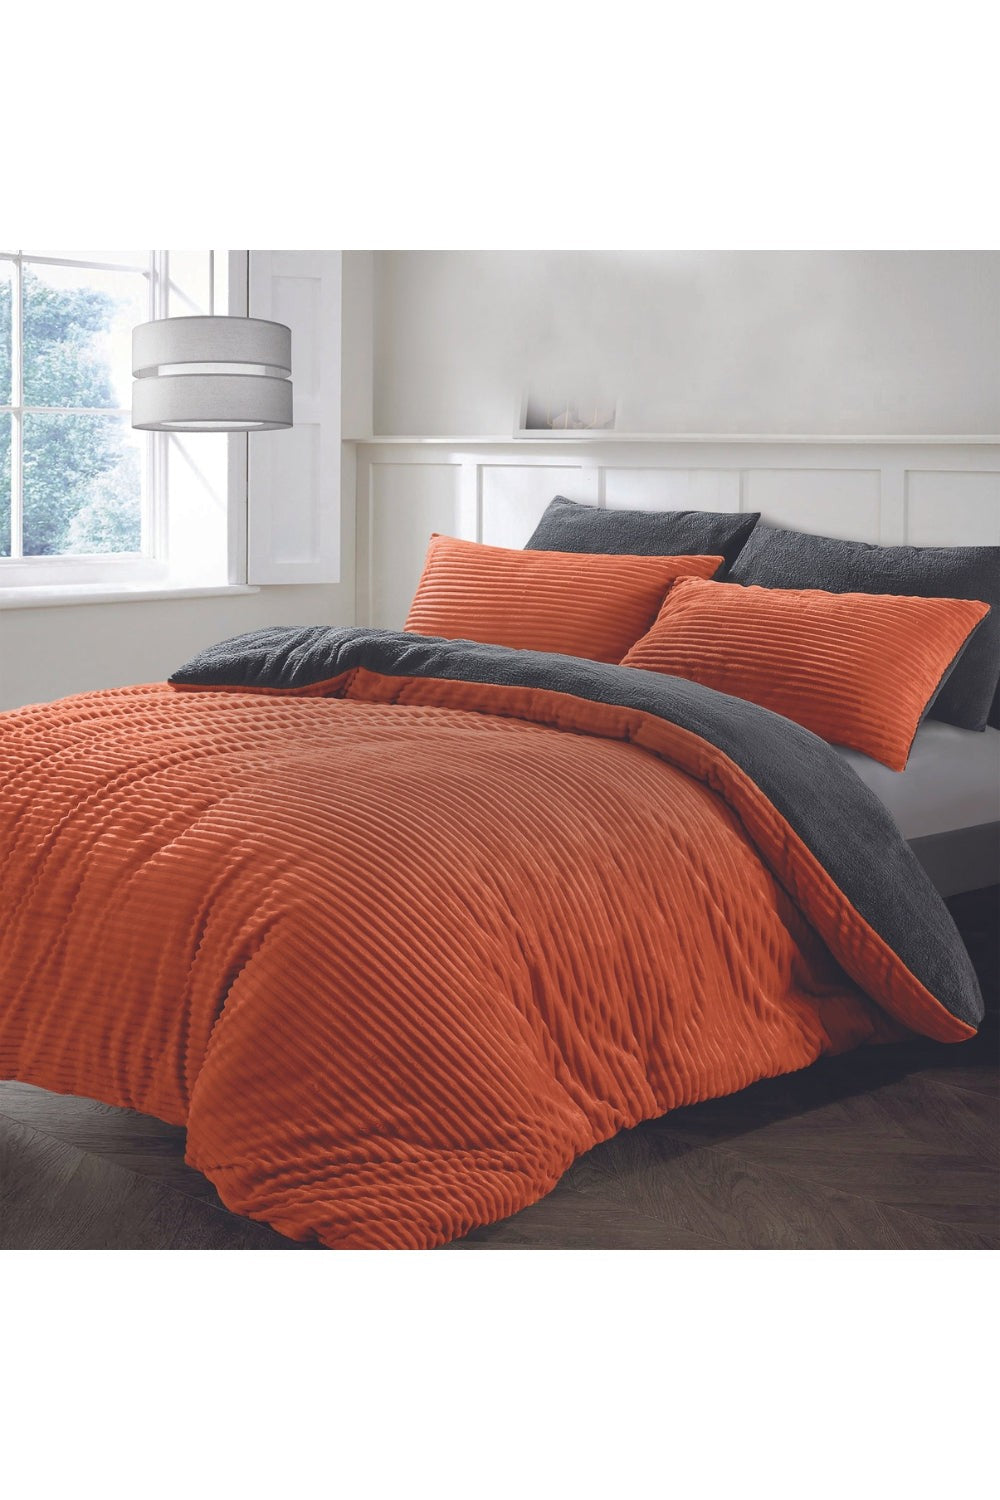  The Home Collection Cord Duvet Cover - Orange 1 Shaws Department Stores